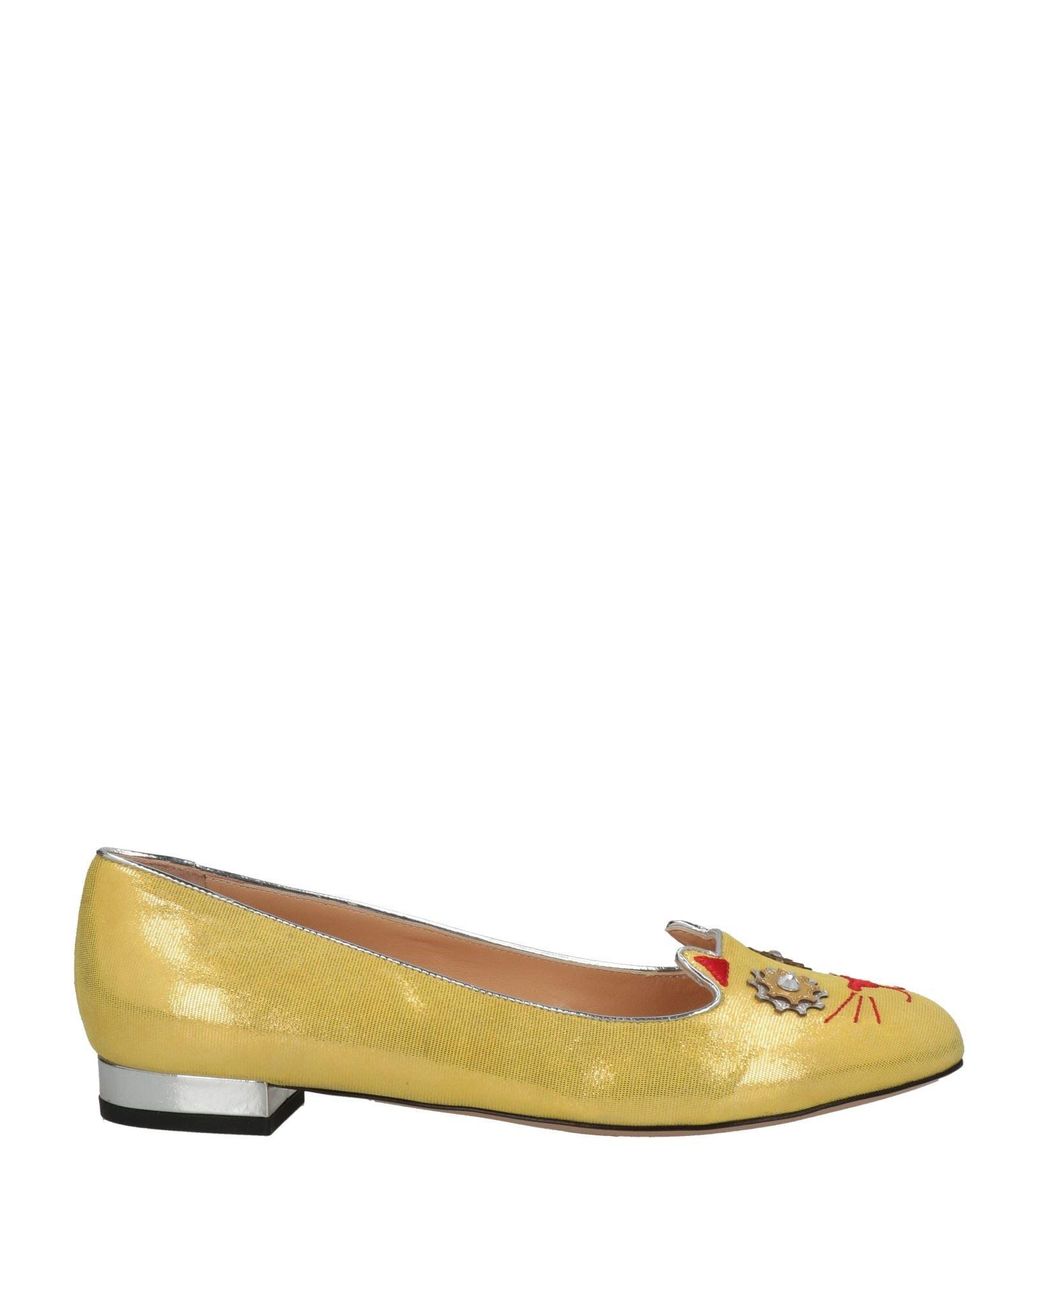 Charlotte Olympia Ballet Flats in Yellow | Lyst